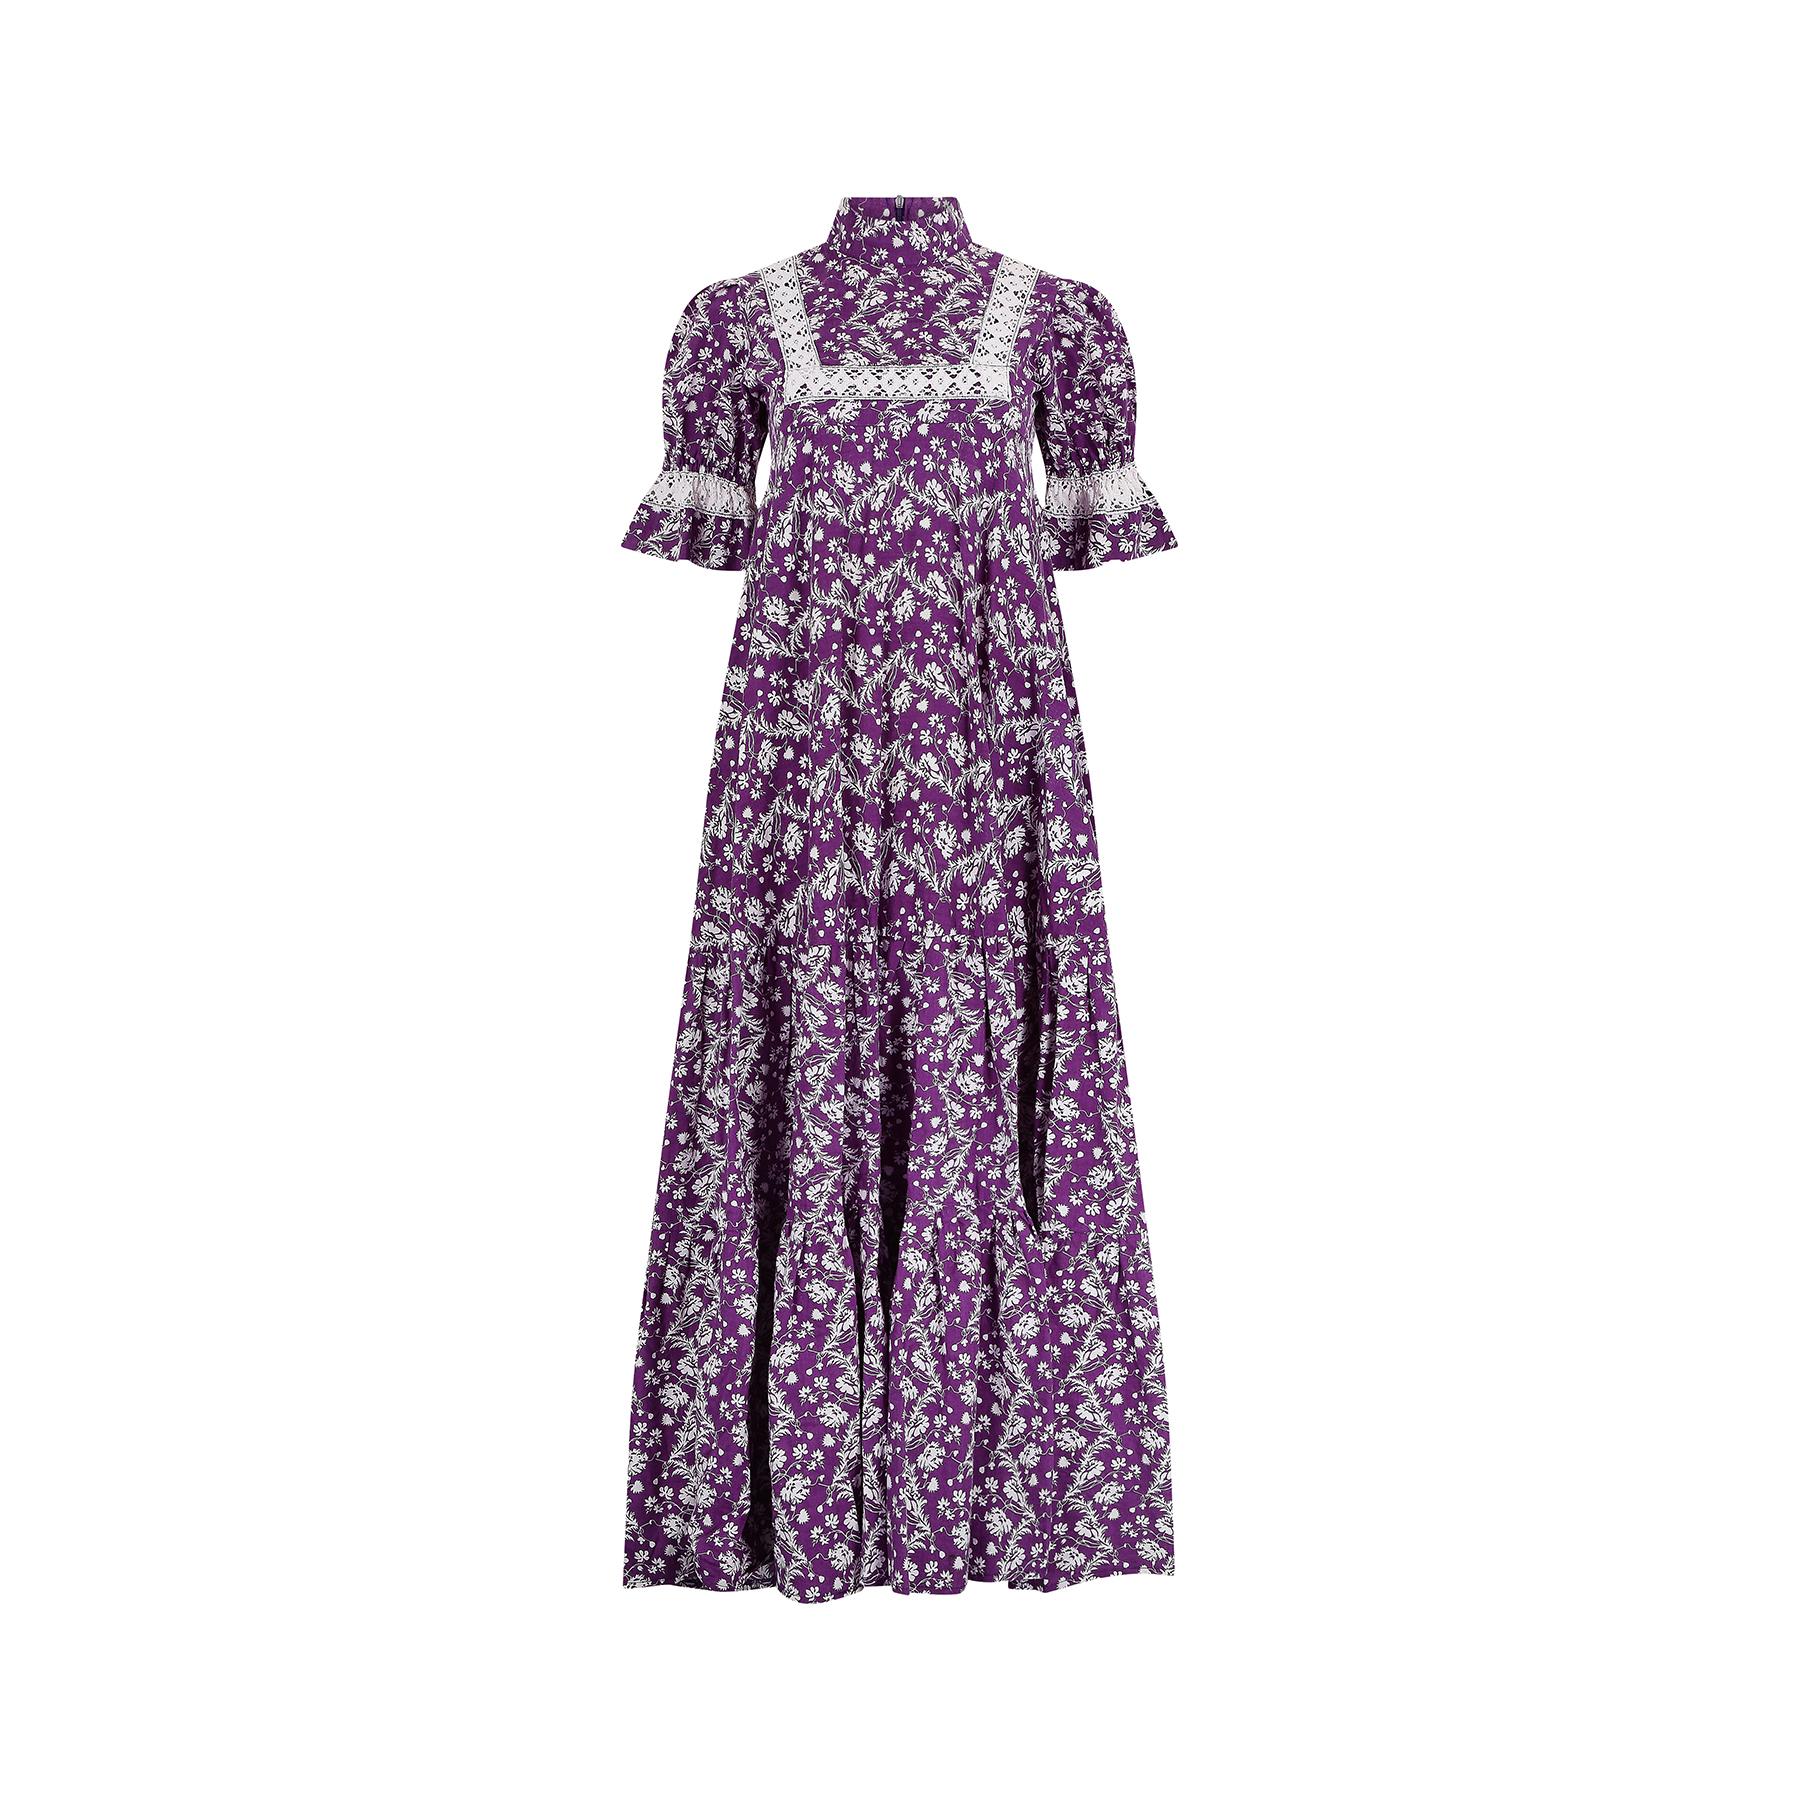 This is the classic early 1970s floral design that catapulted Laura Ashley into the darling of the British High Street. We've sold this dress many times over the years but never in this striking purple and white combination. It is made from a medium